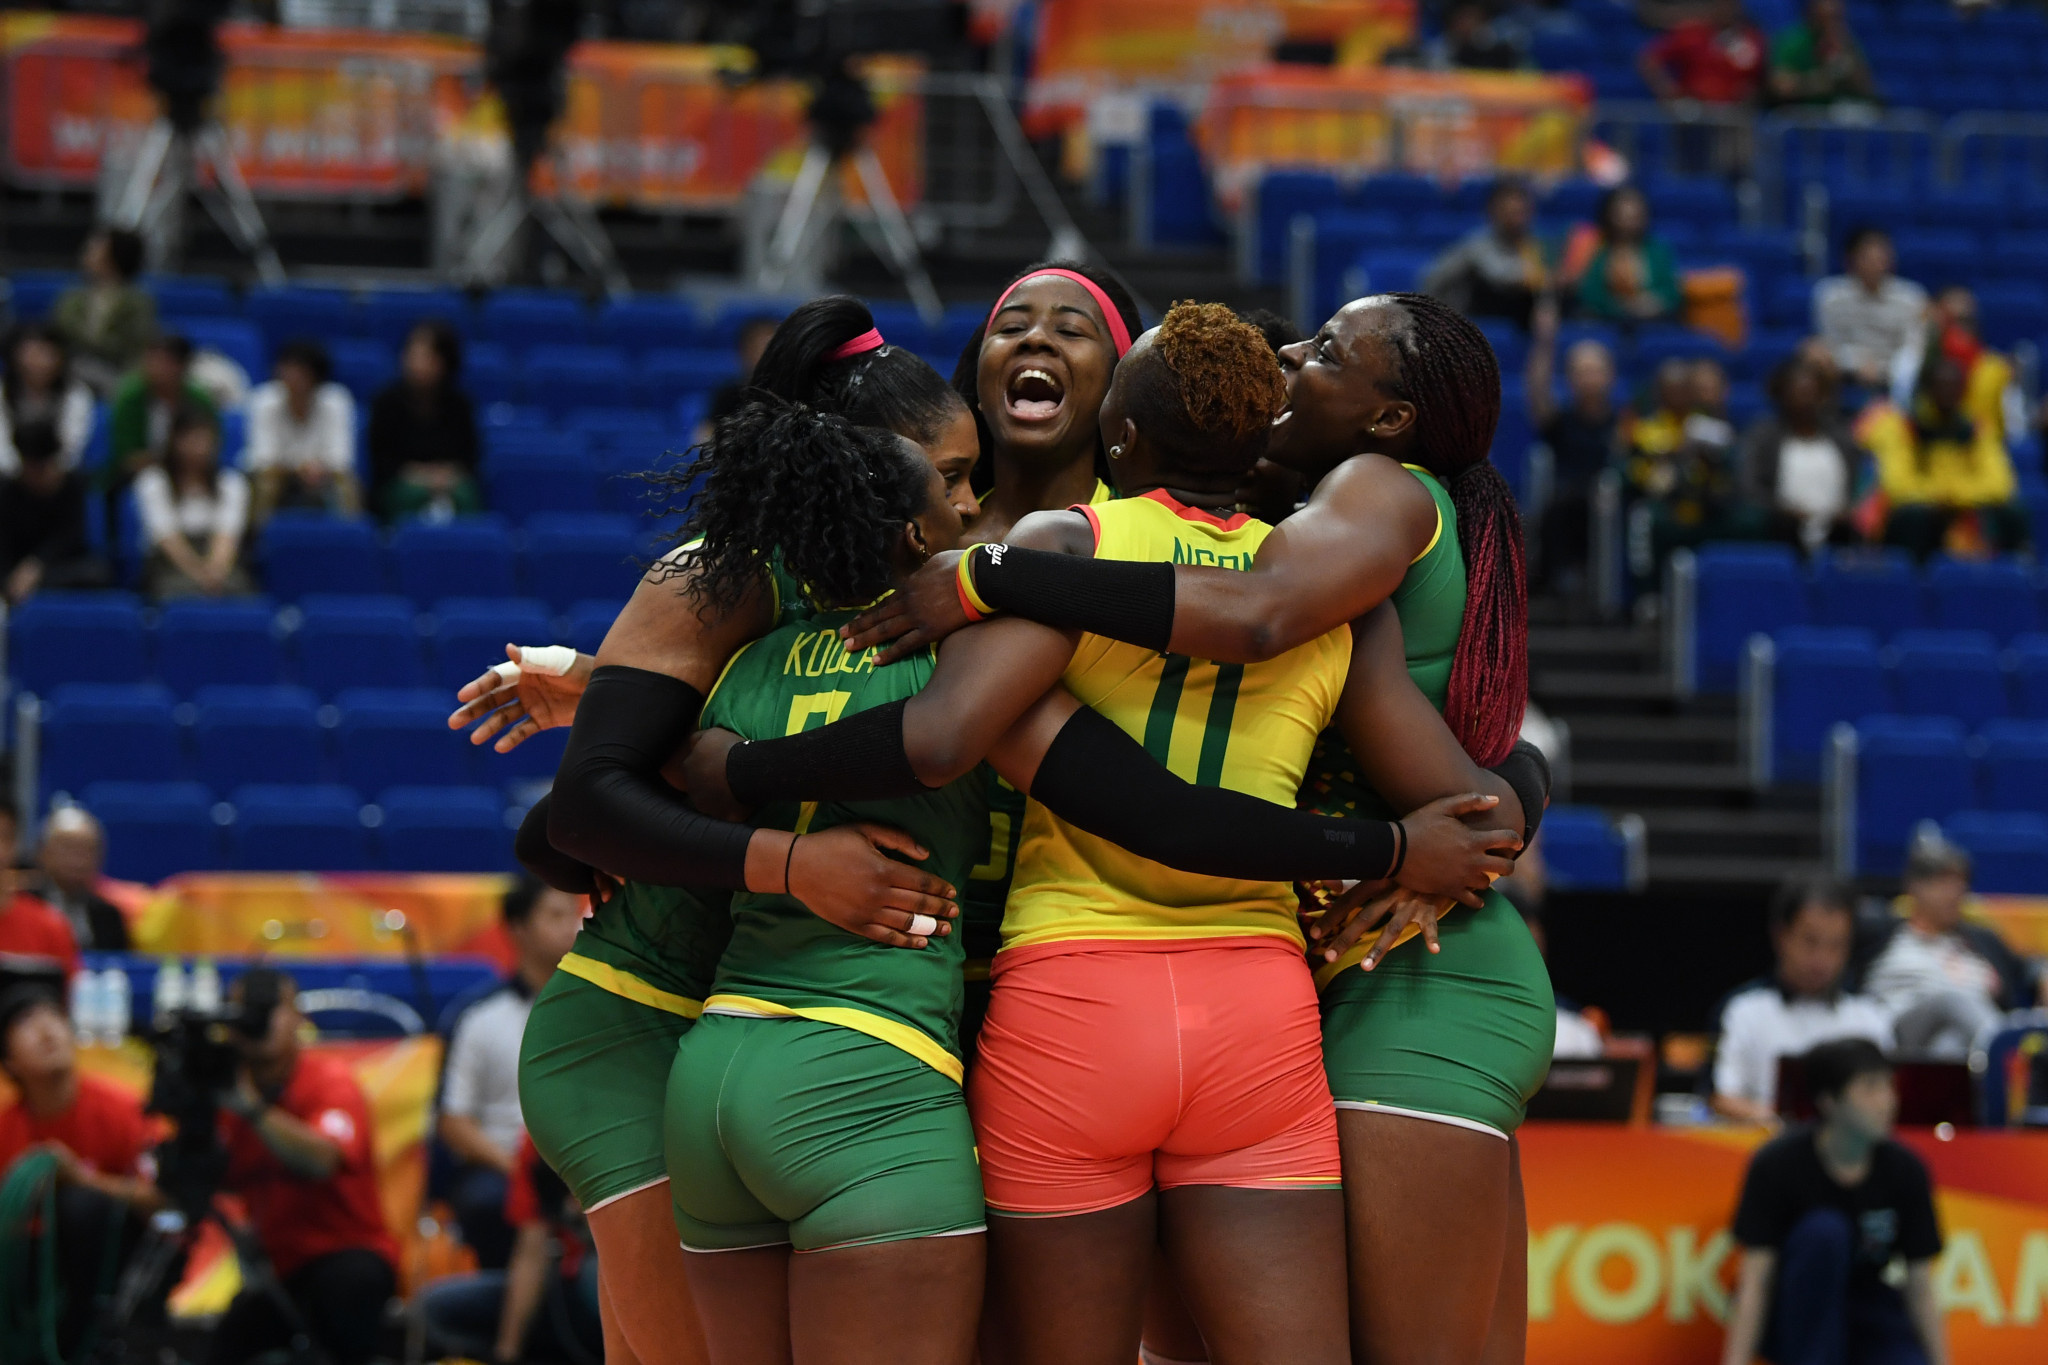 Cameroon were the first African nation to record a win at a Women's Volleyball World Championships, showing the recent global development of the sport ©Getty Images 